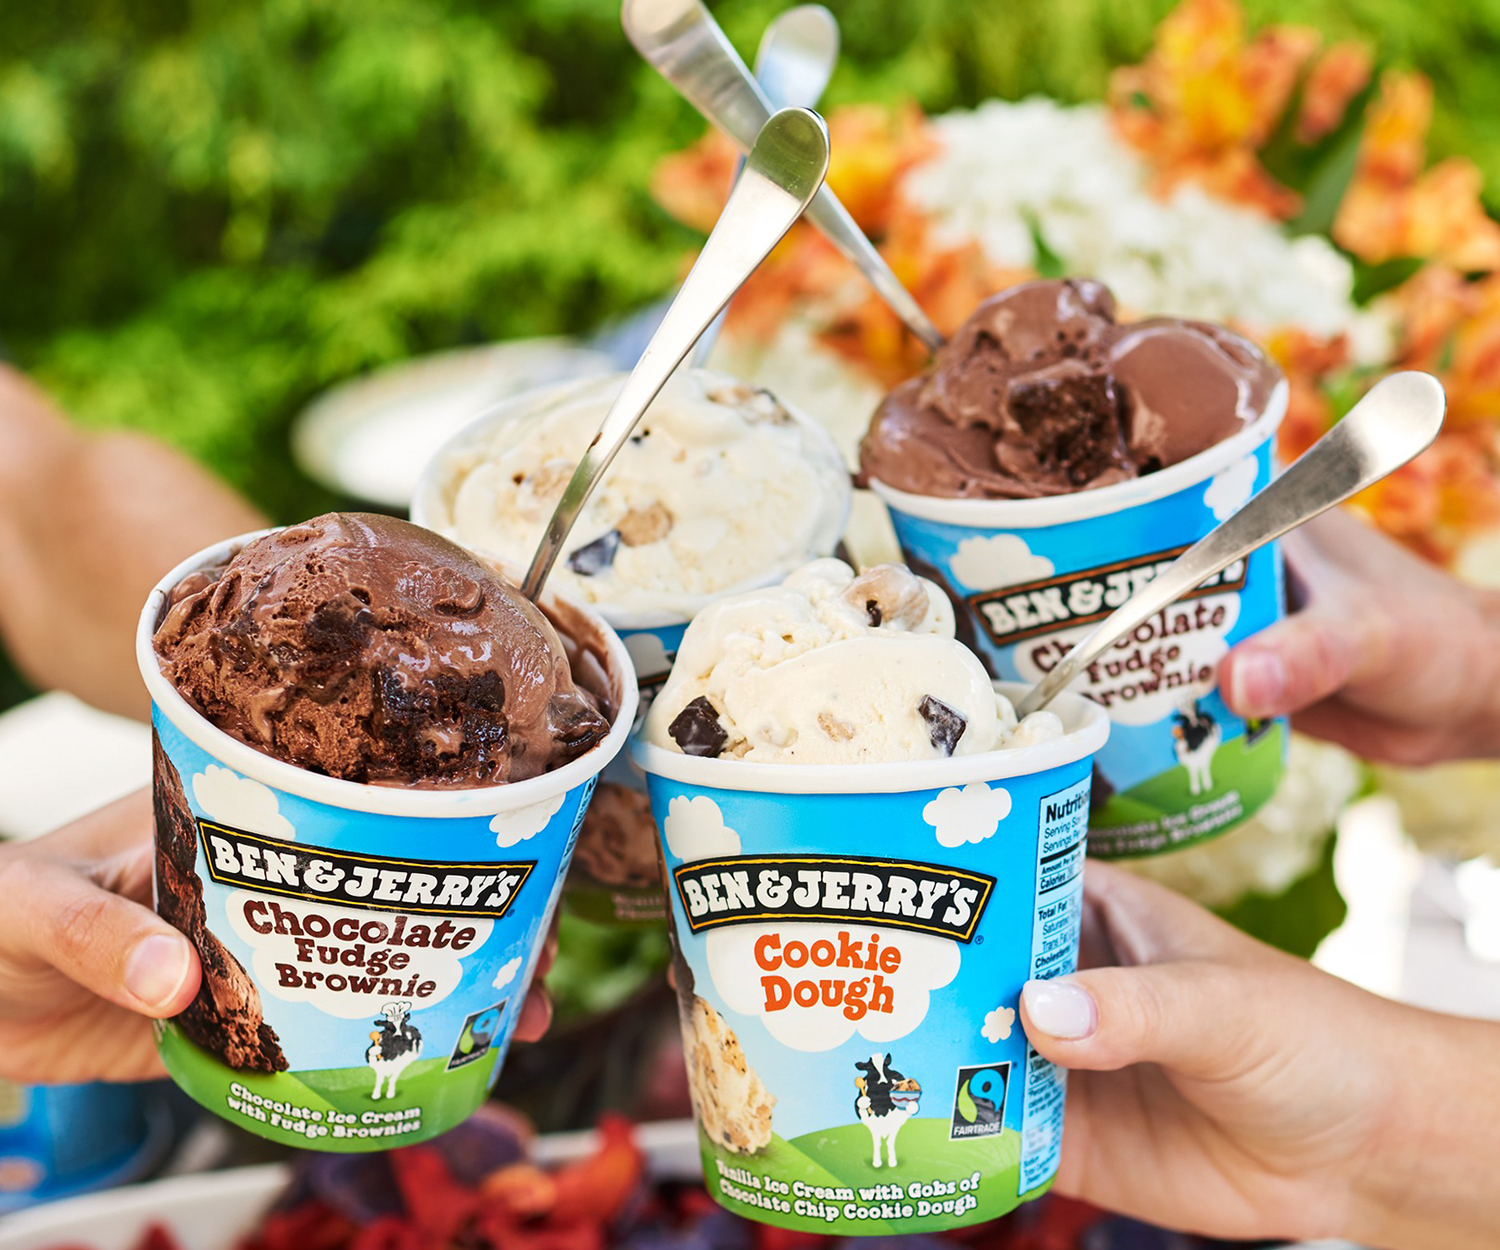 ben and jerrys ice cream pints canada u.s from wholesale distributor transcold distribution